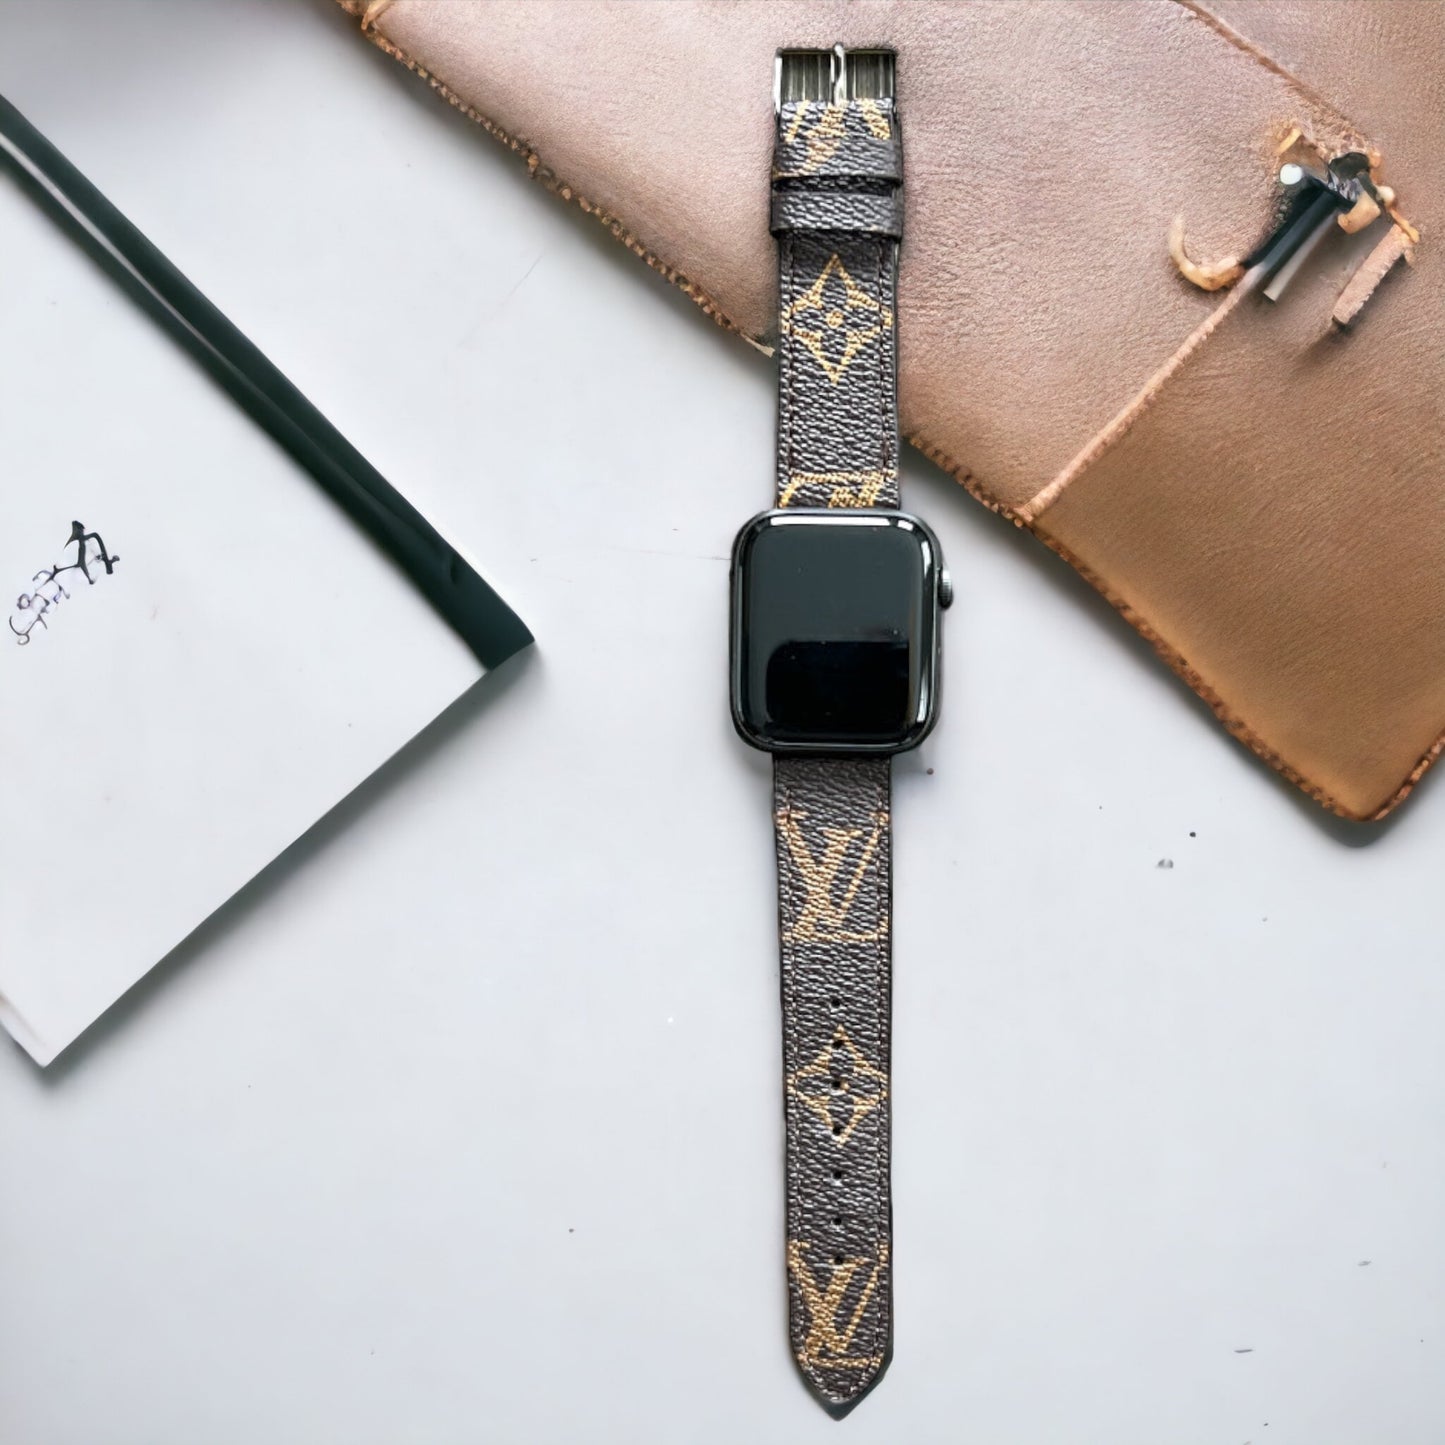 brown lv monogram luxury leather apple watch band